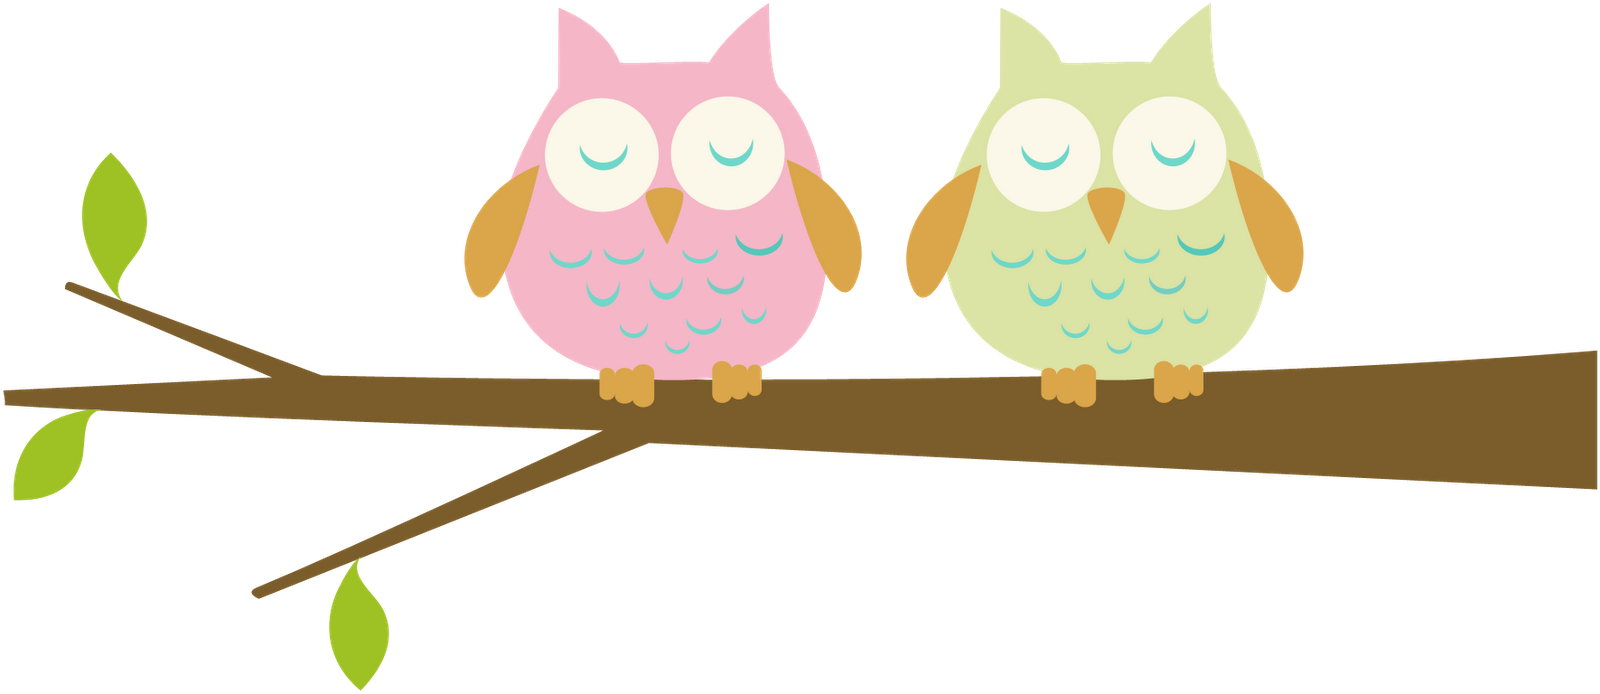 Baby Owl Clip Art - Clipart l - Free Baby Clipart Images